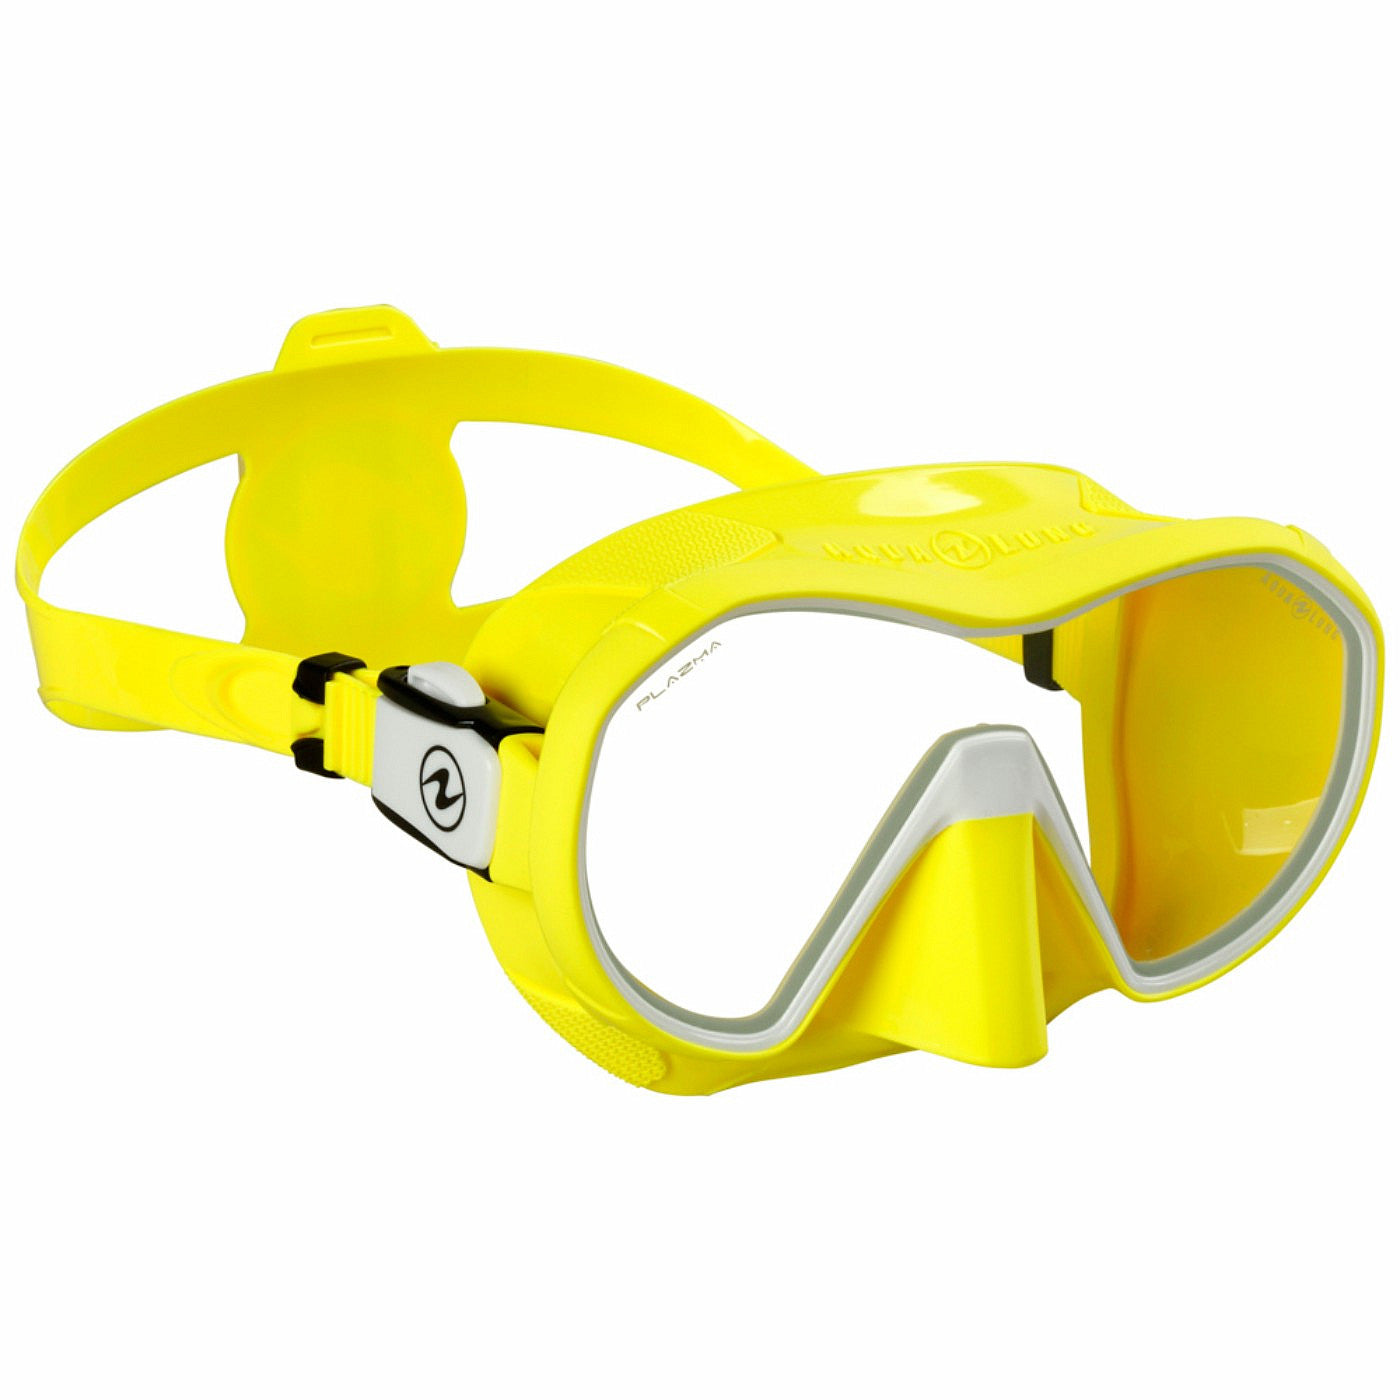 Aqualung Plazma Diving Mask Yellow White